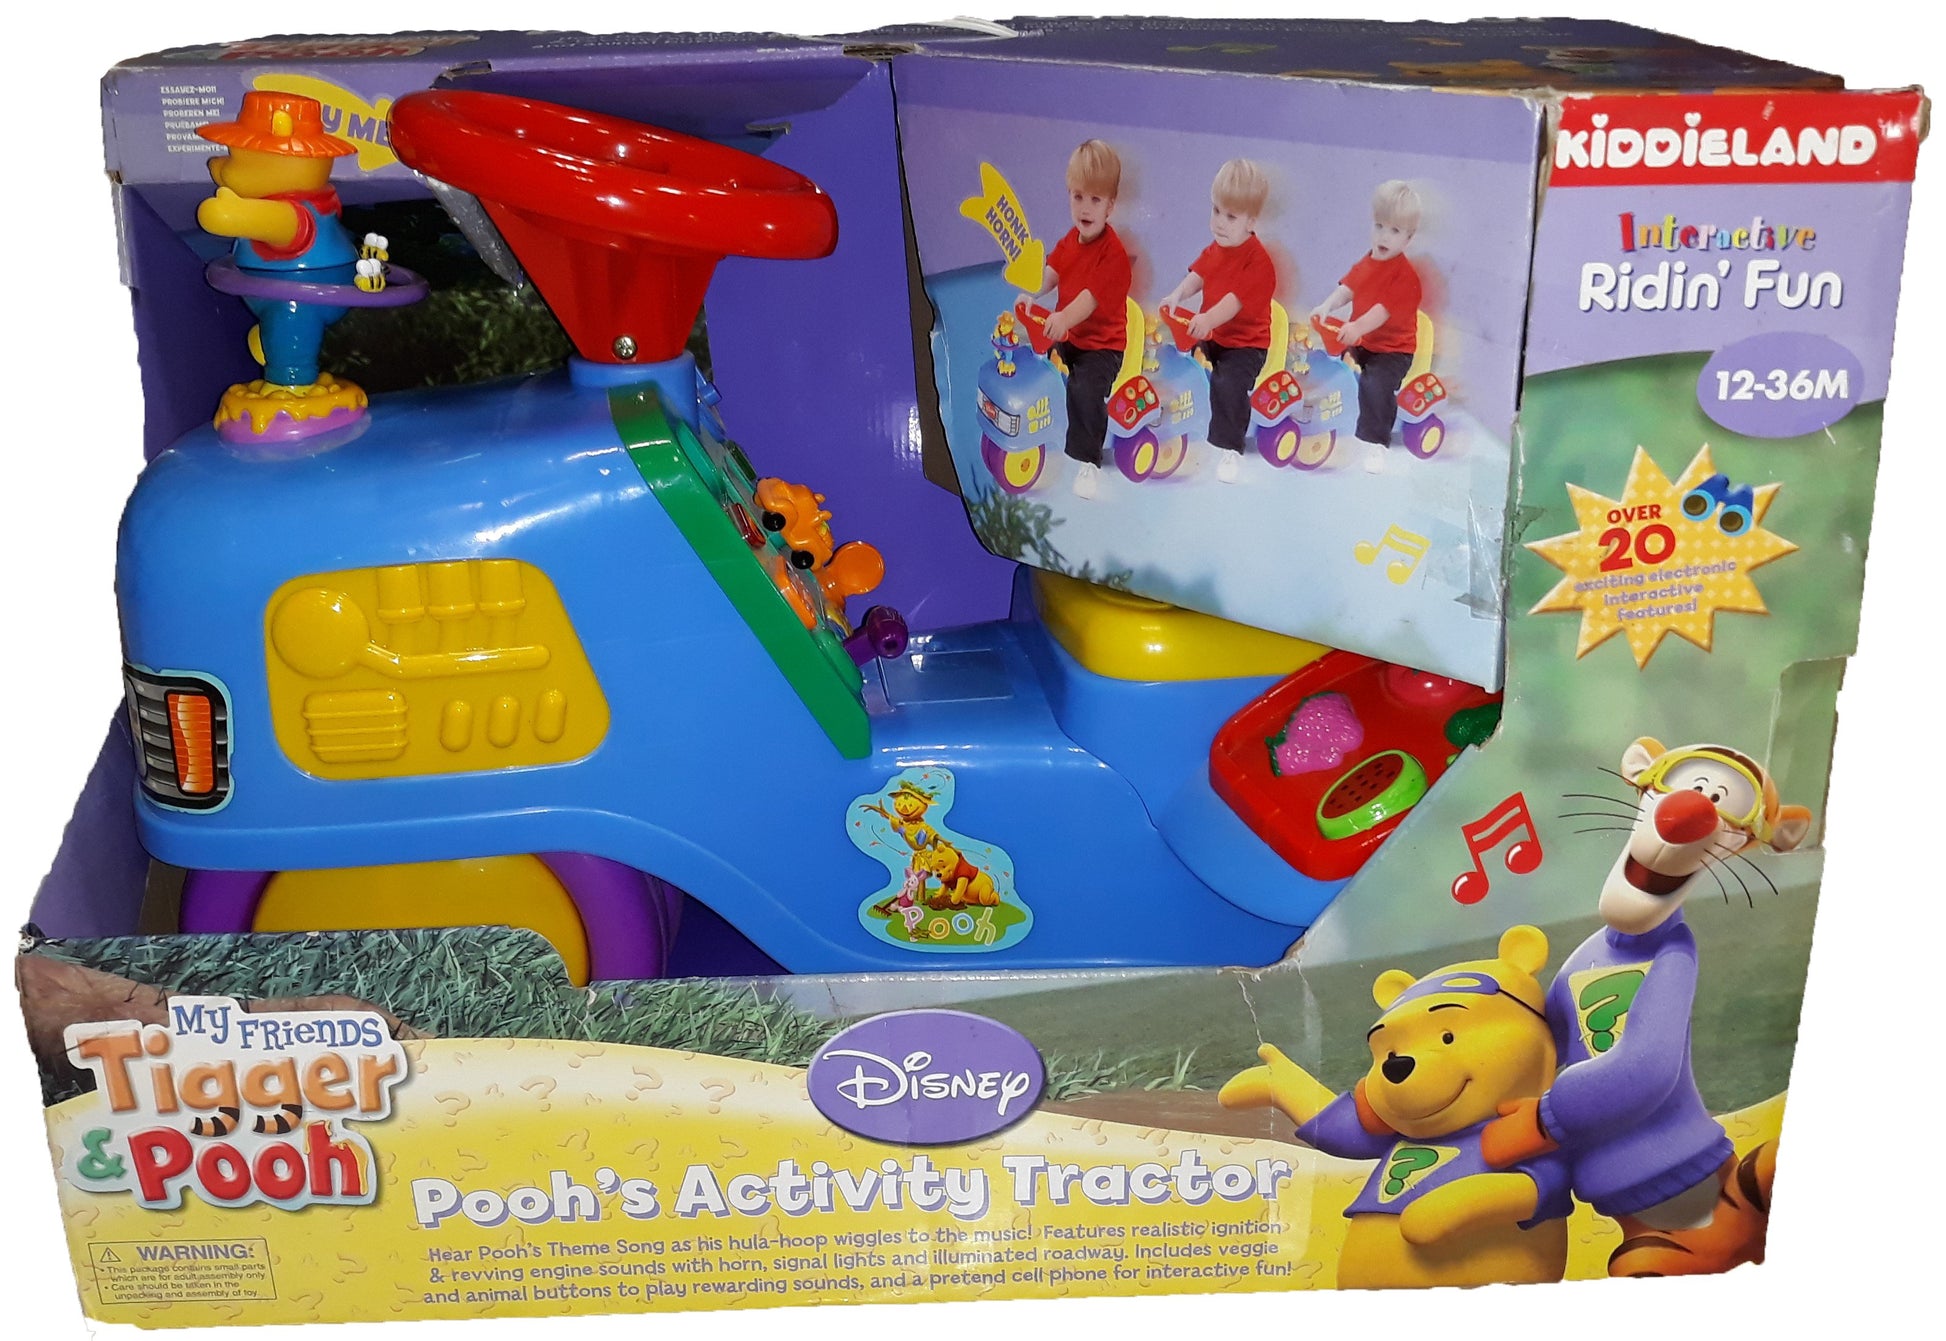 Tiger And Pooh Activity Tractor